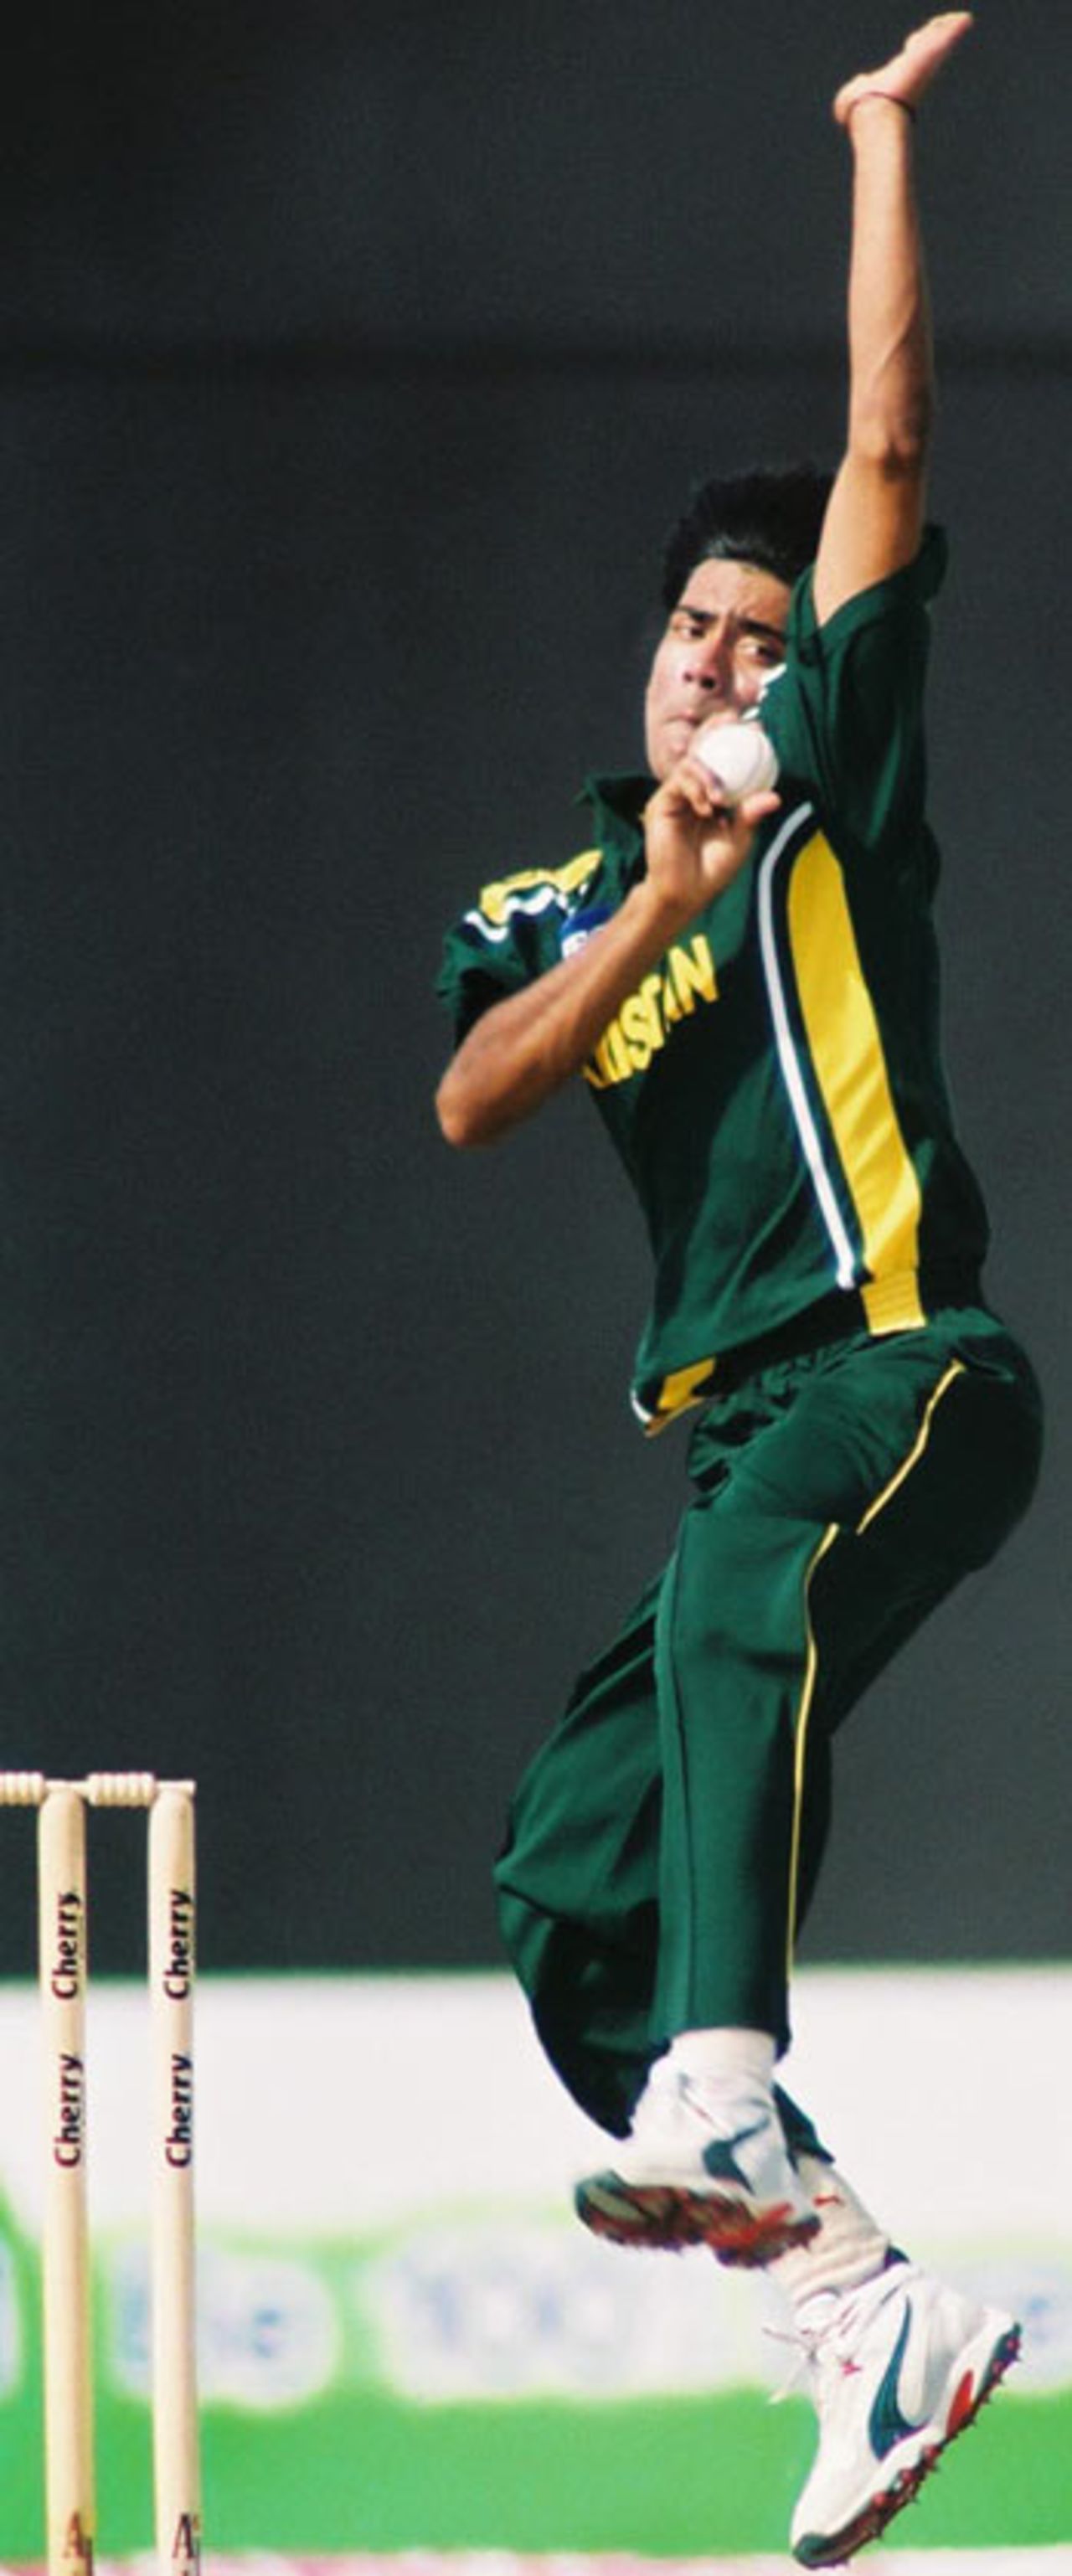 Mohammad Sami delivers a ball, Final: Pakistan v Zimbabwe, Cherry Blossom Sharjah Cup, 10 Apr 2003